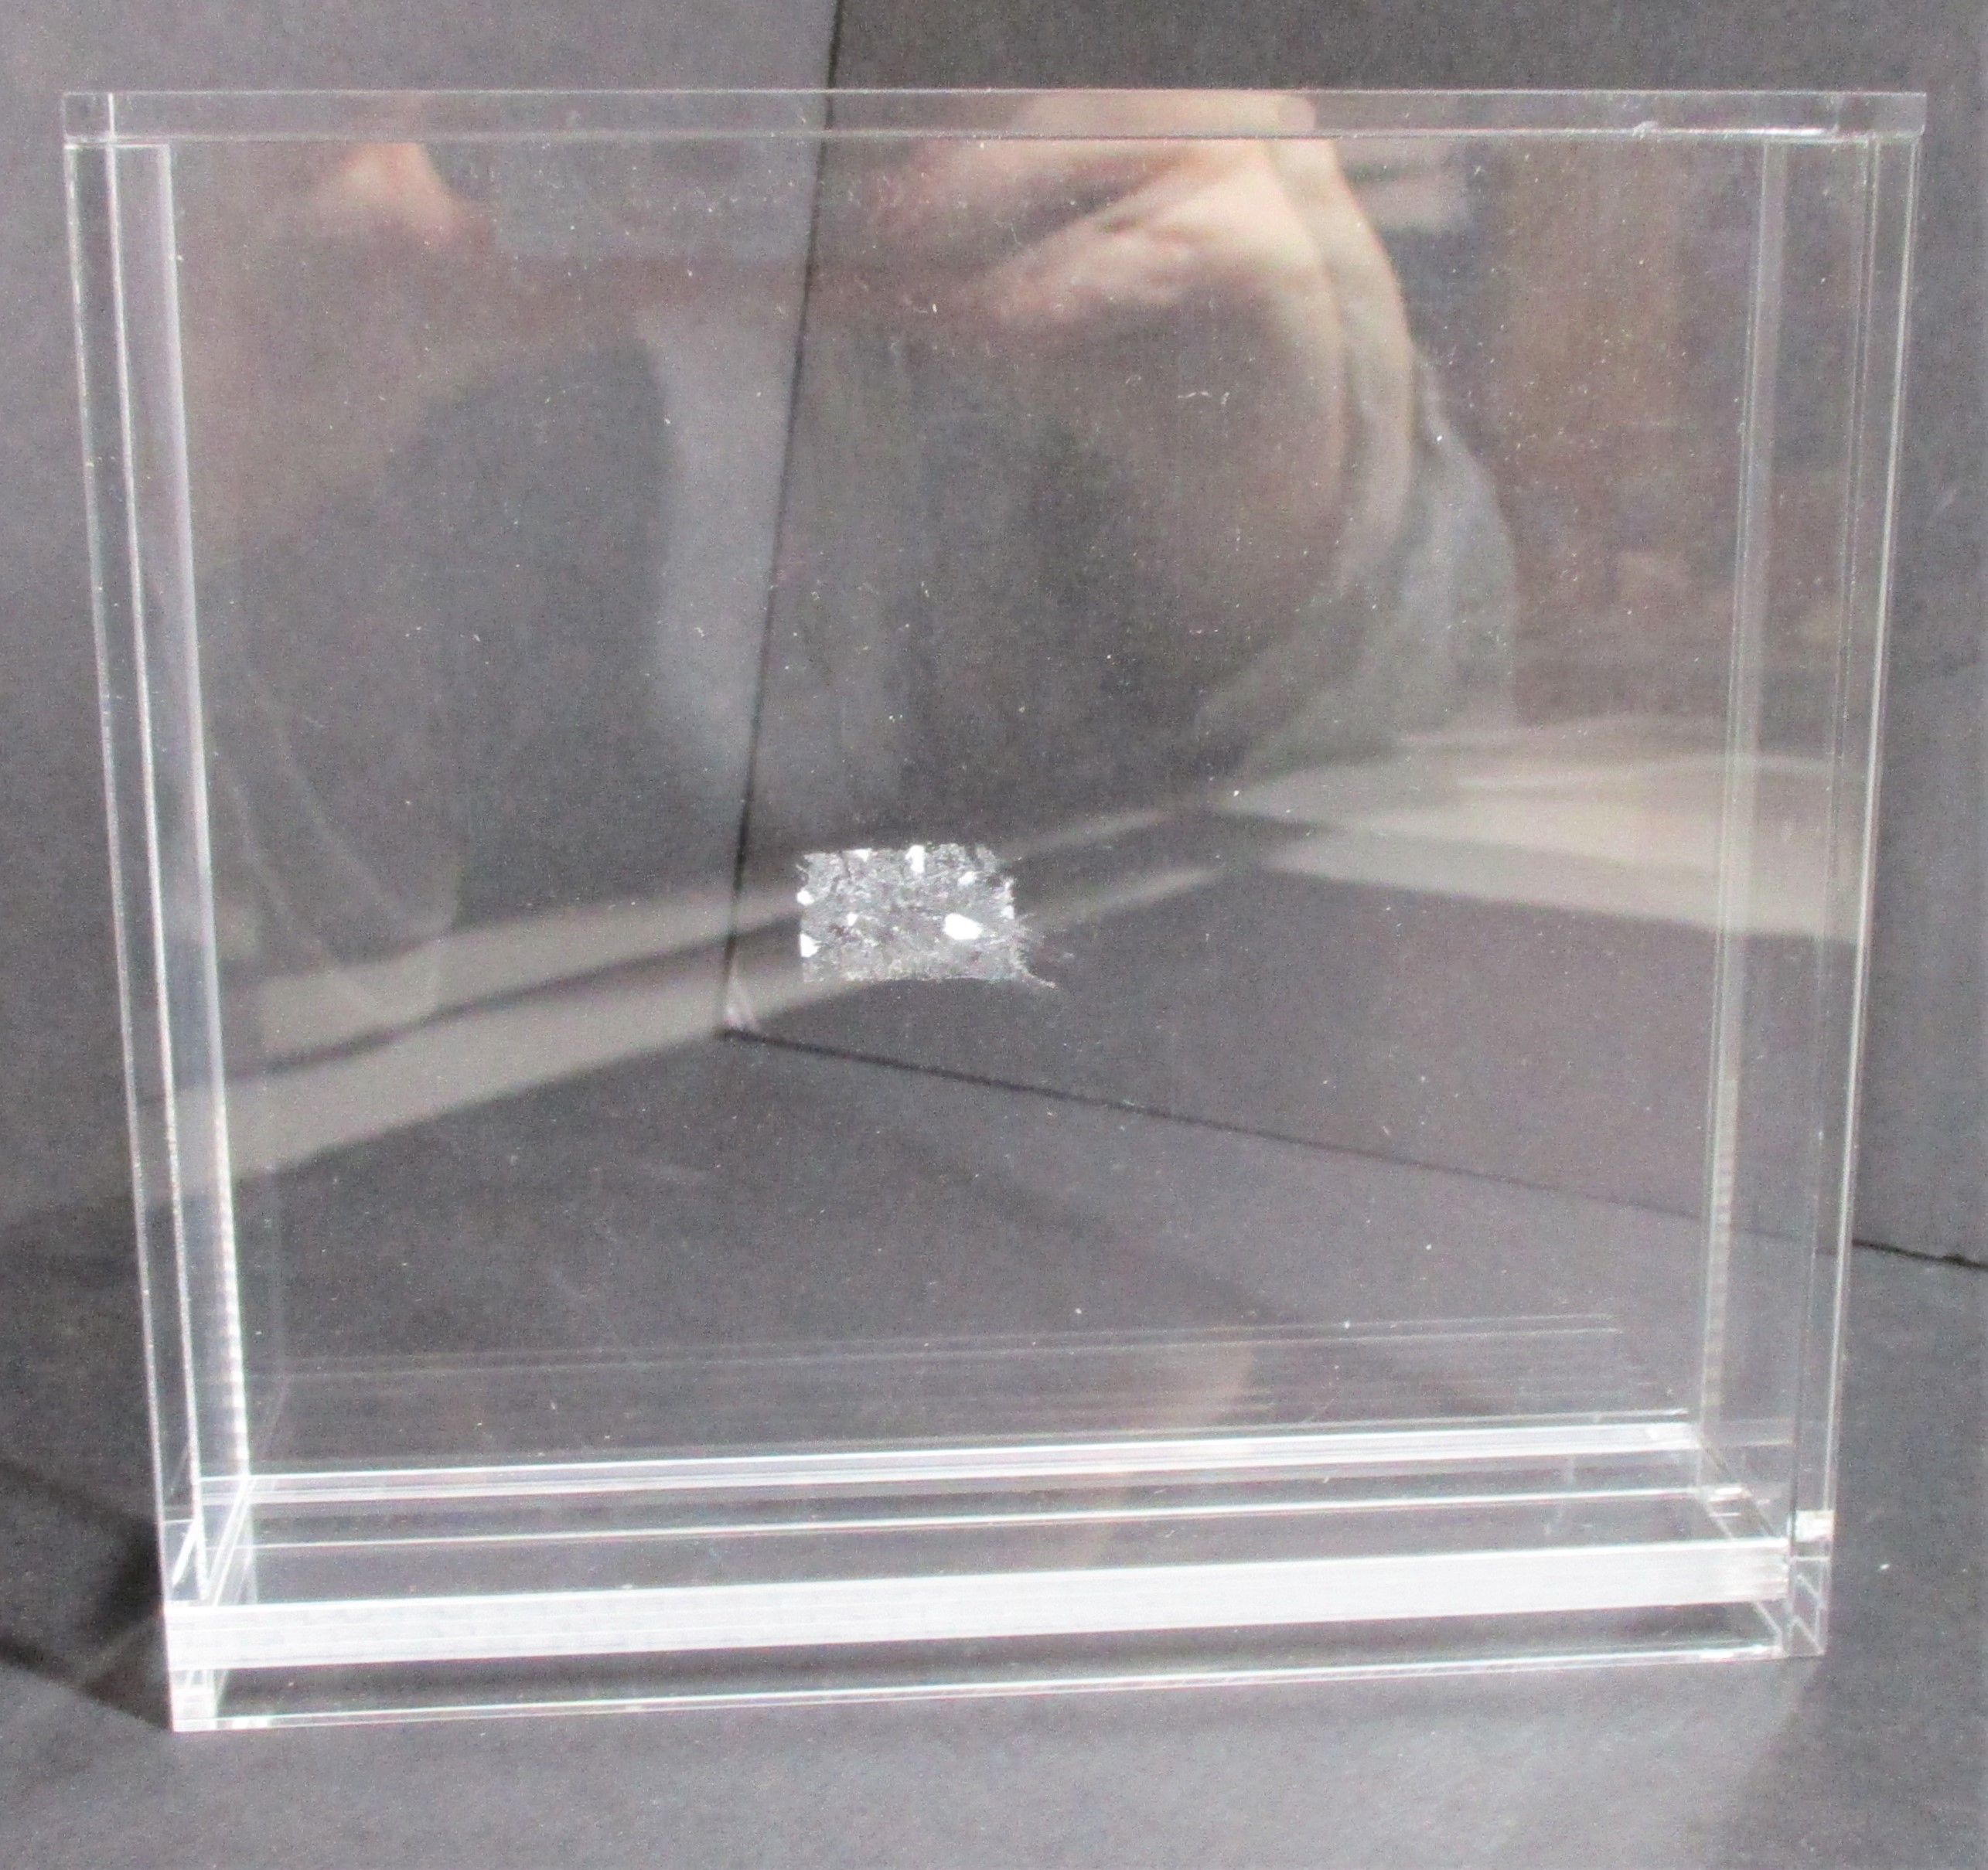 PS1 Acrylic Display Guard with Insert (60035)